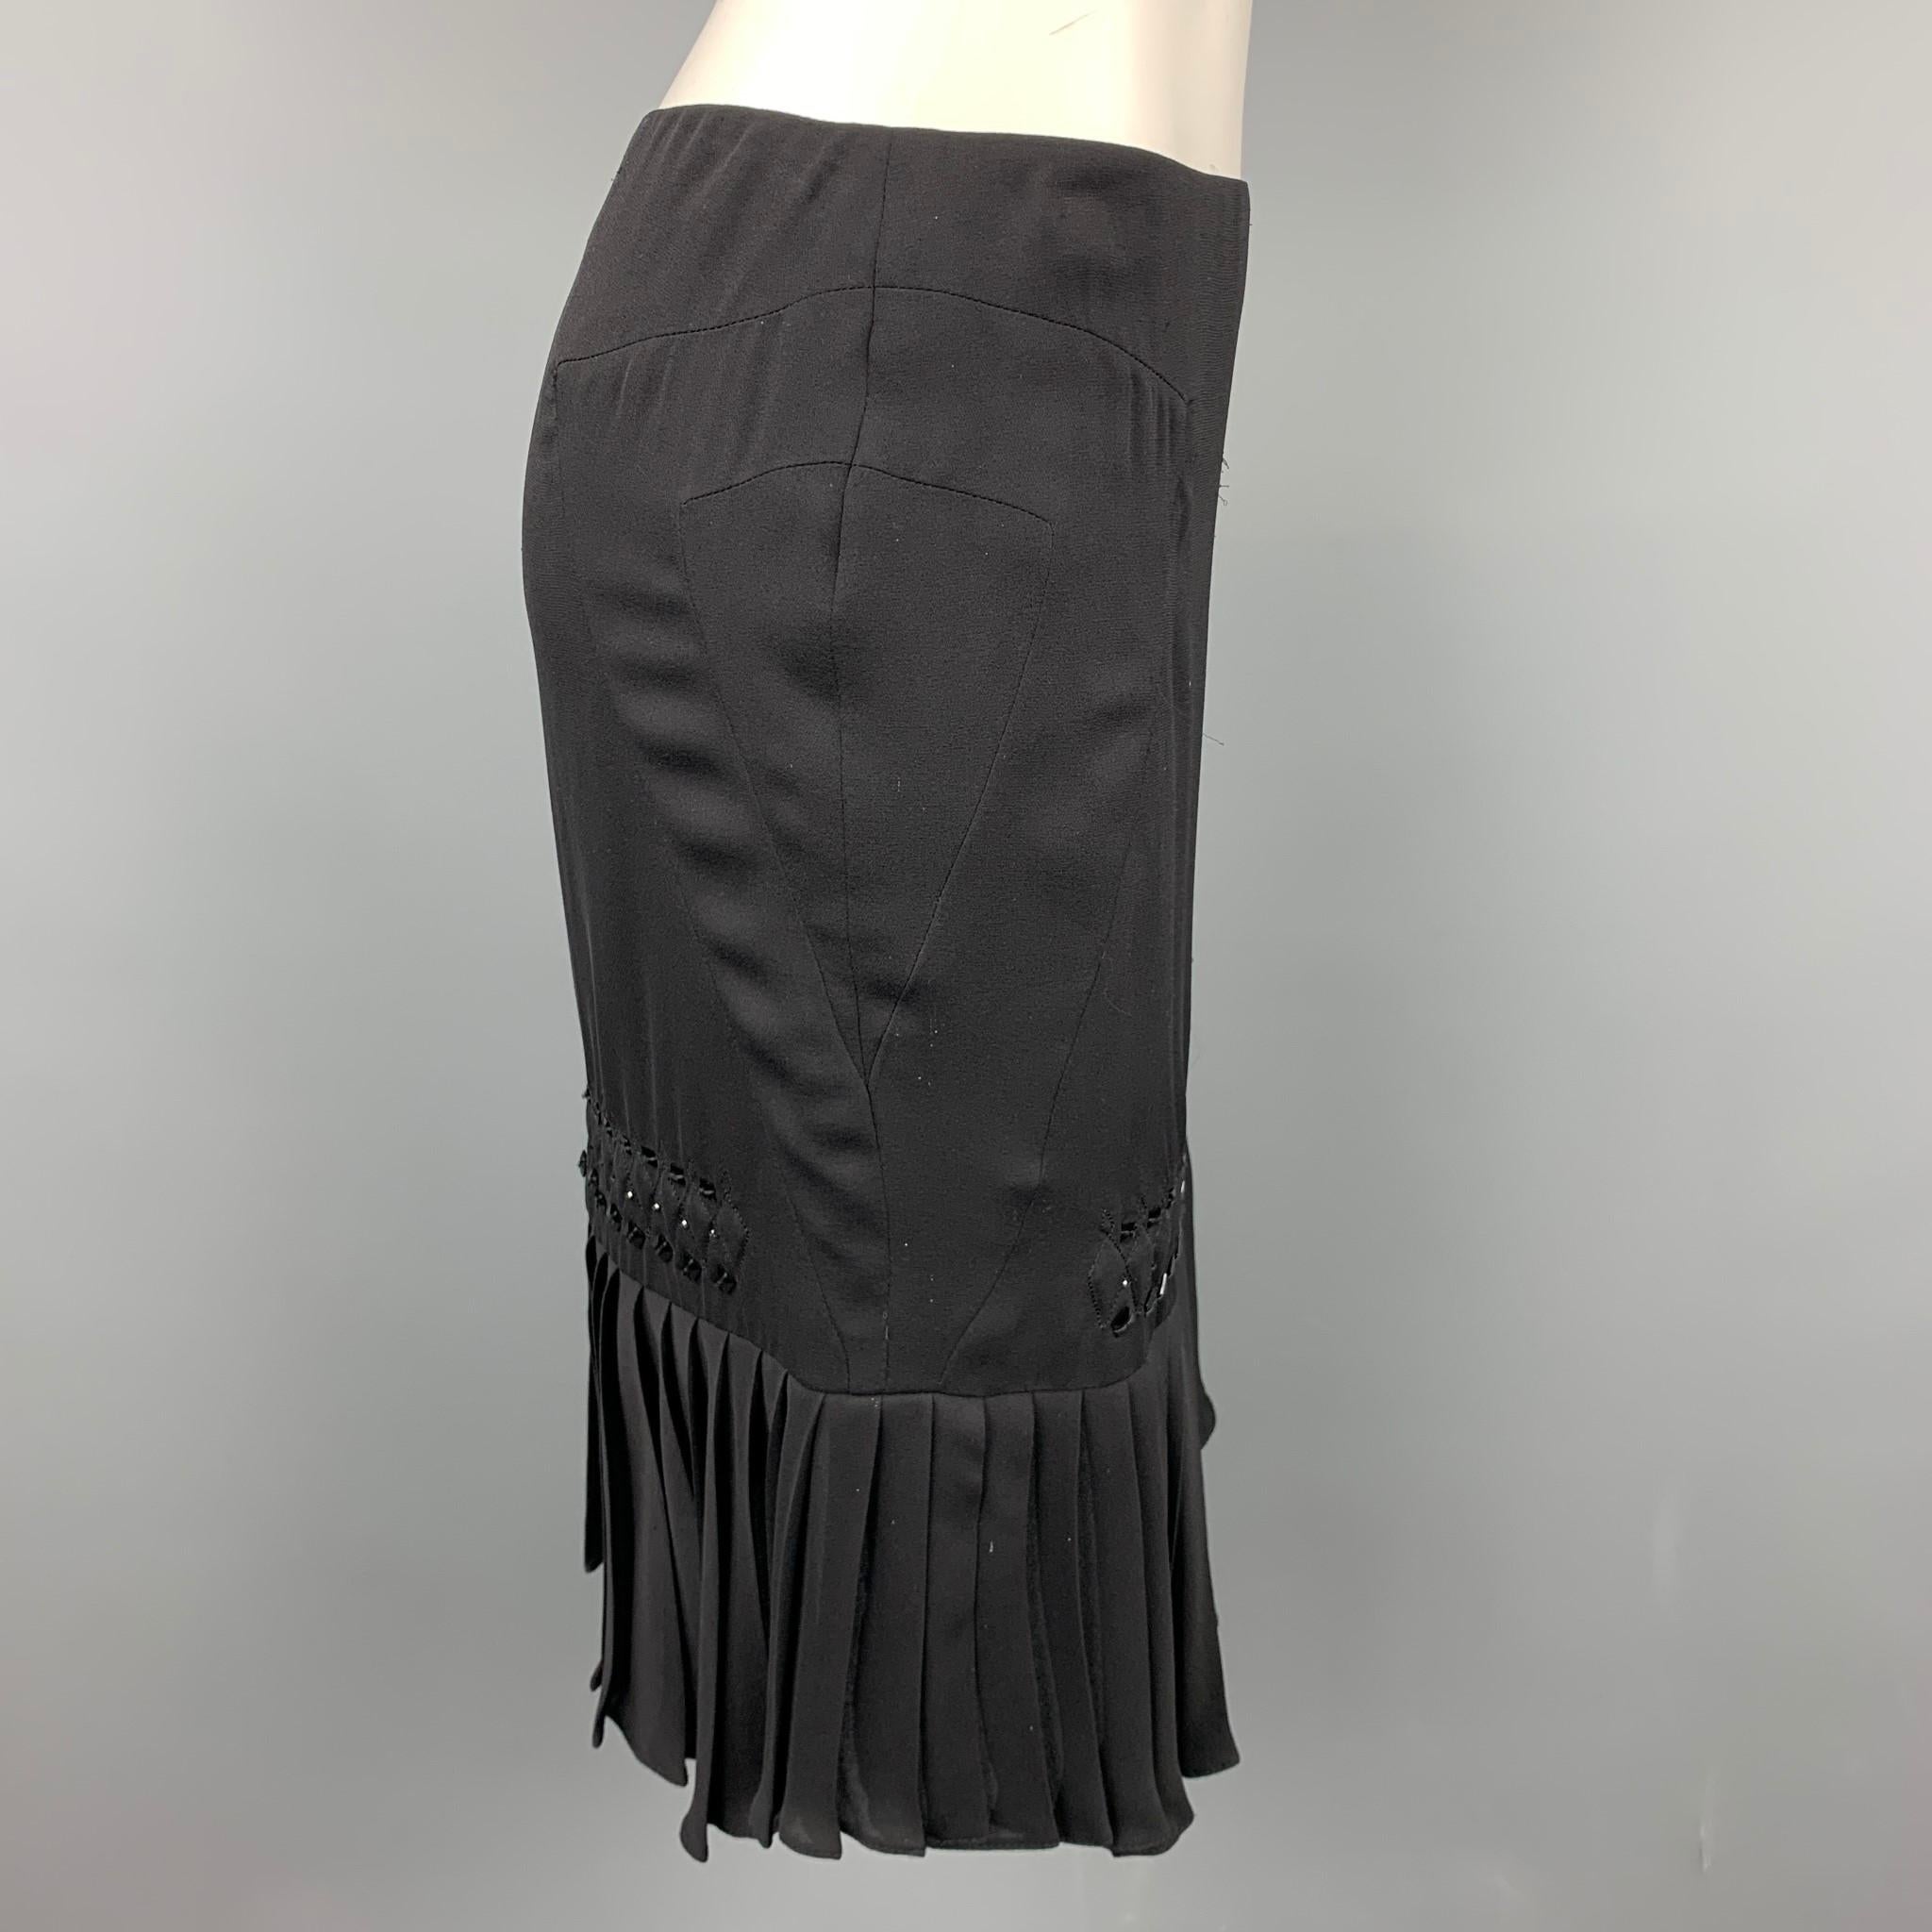 GUCCI skirt comes in a black silk with beaded details featuring a pleated style, top stitching, and a side zipper closure. Made in Italy.

Excellent Pre-Owned Condition.
Marked: IT 38

Measurements:

Waist: 28 in. 
Hip: 34 in.
Length: 21 in. 